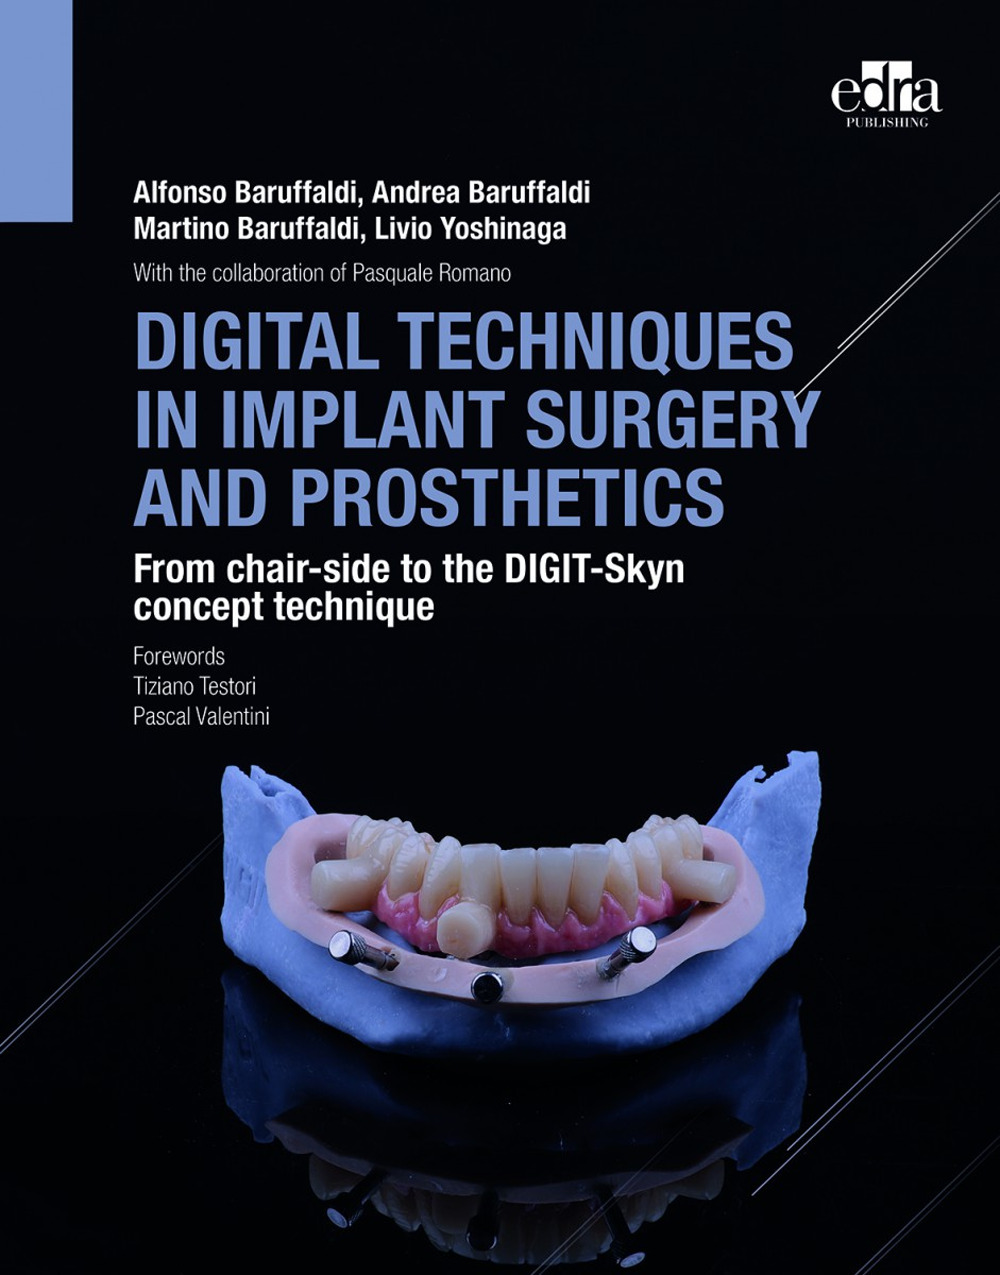 Digital techniques in implant surgery and prosthetics. From chair-side to the DIGIT-Skyn concept technique